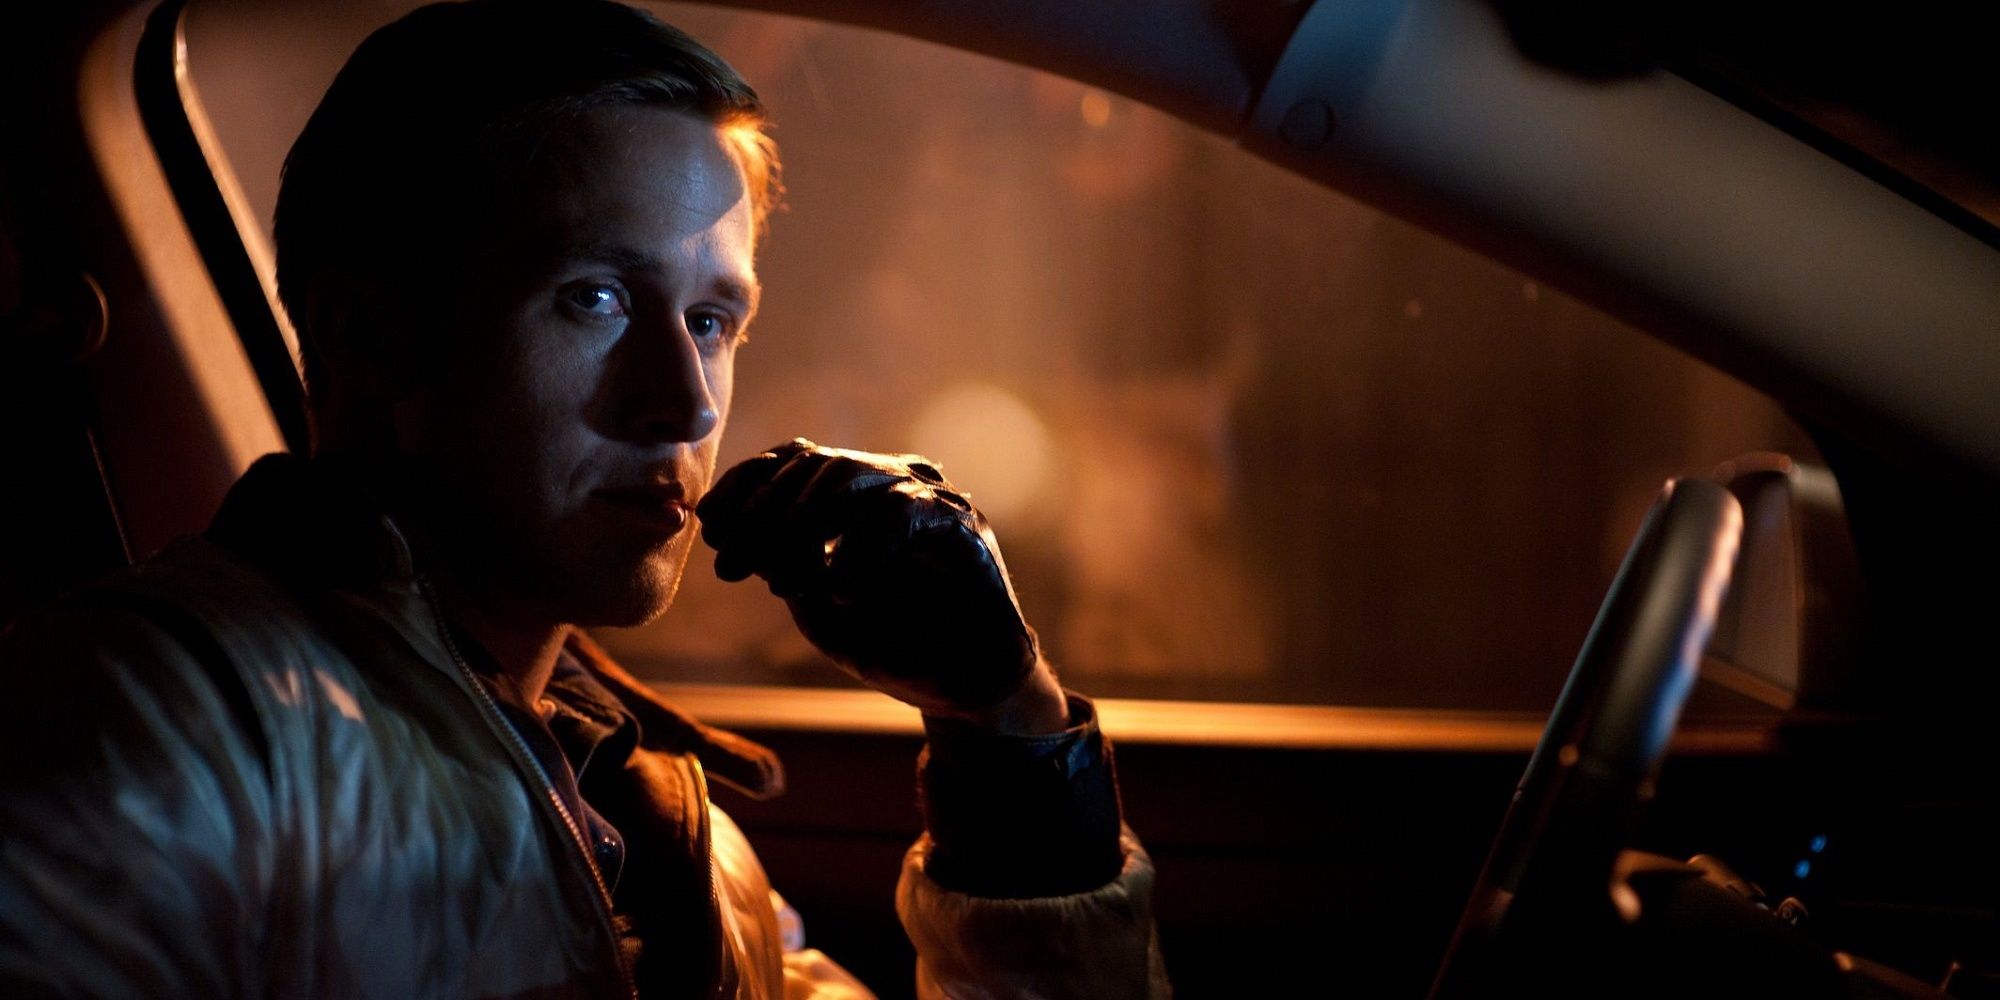 Driver in his car at night while being a getaway driver in 'Drive.'